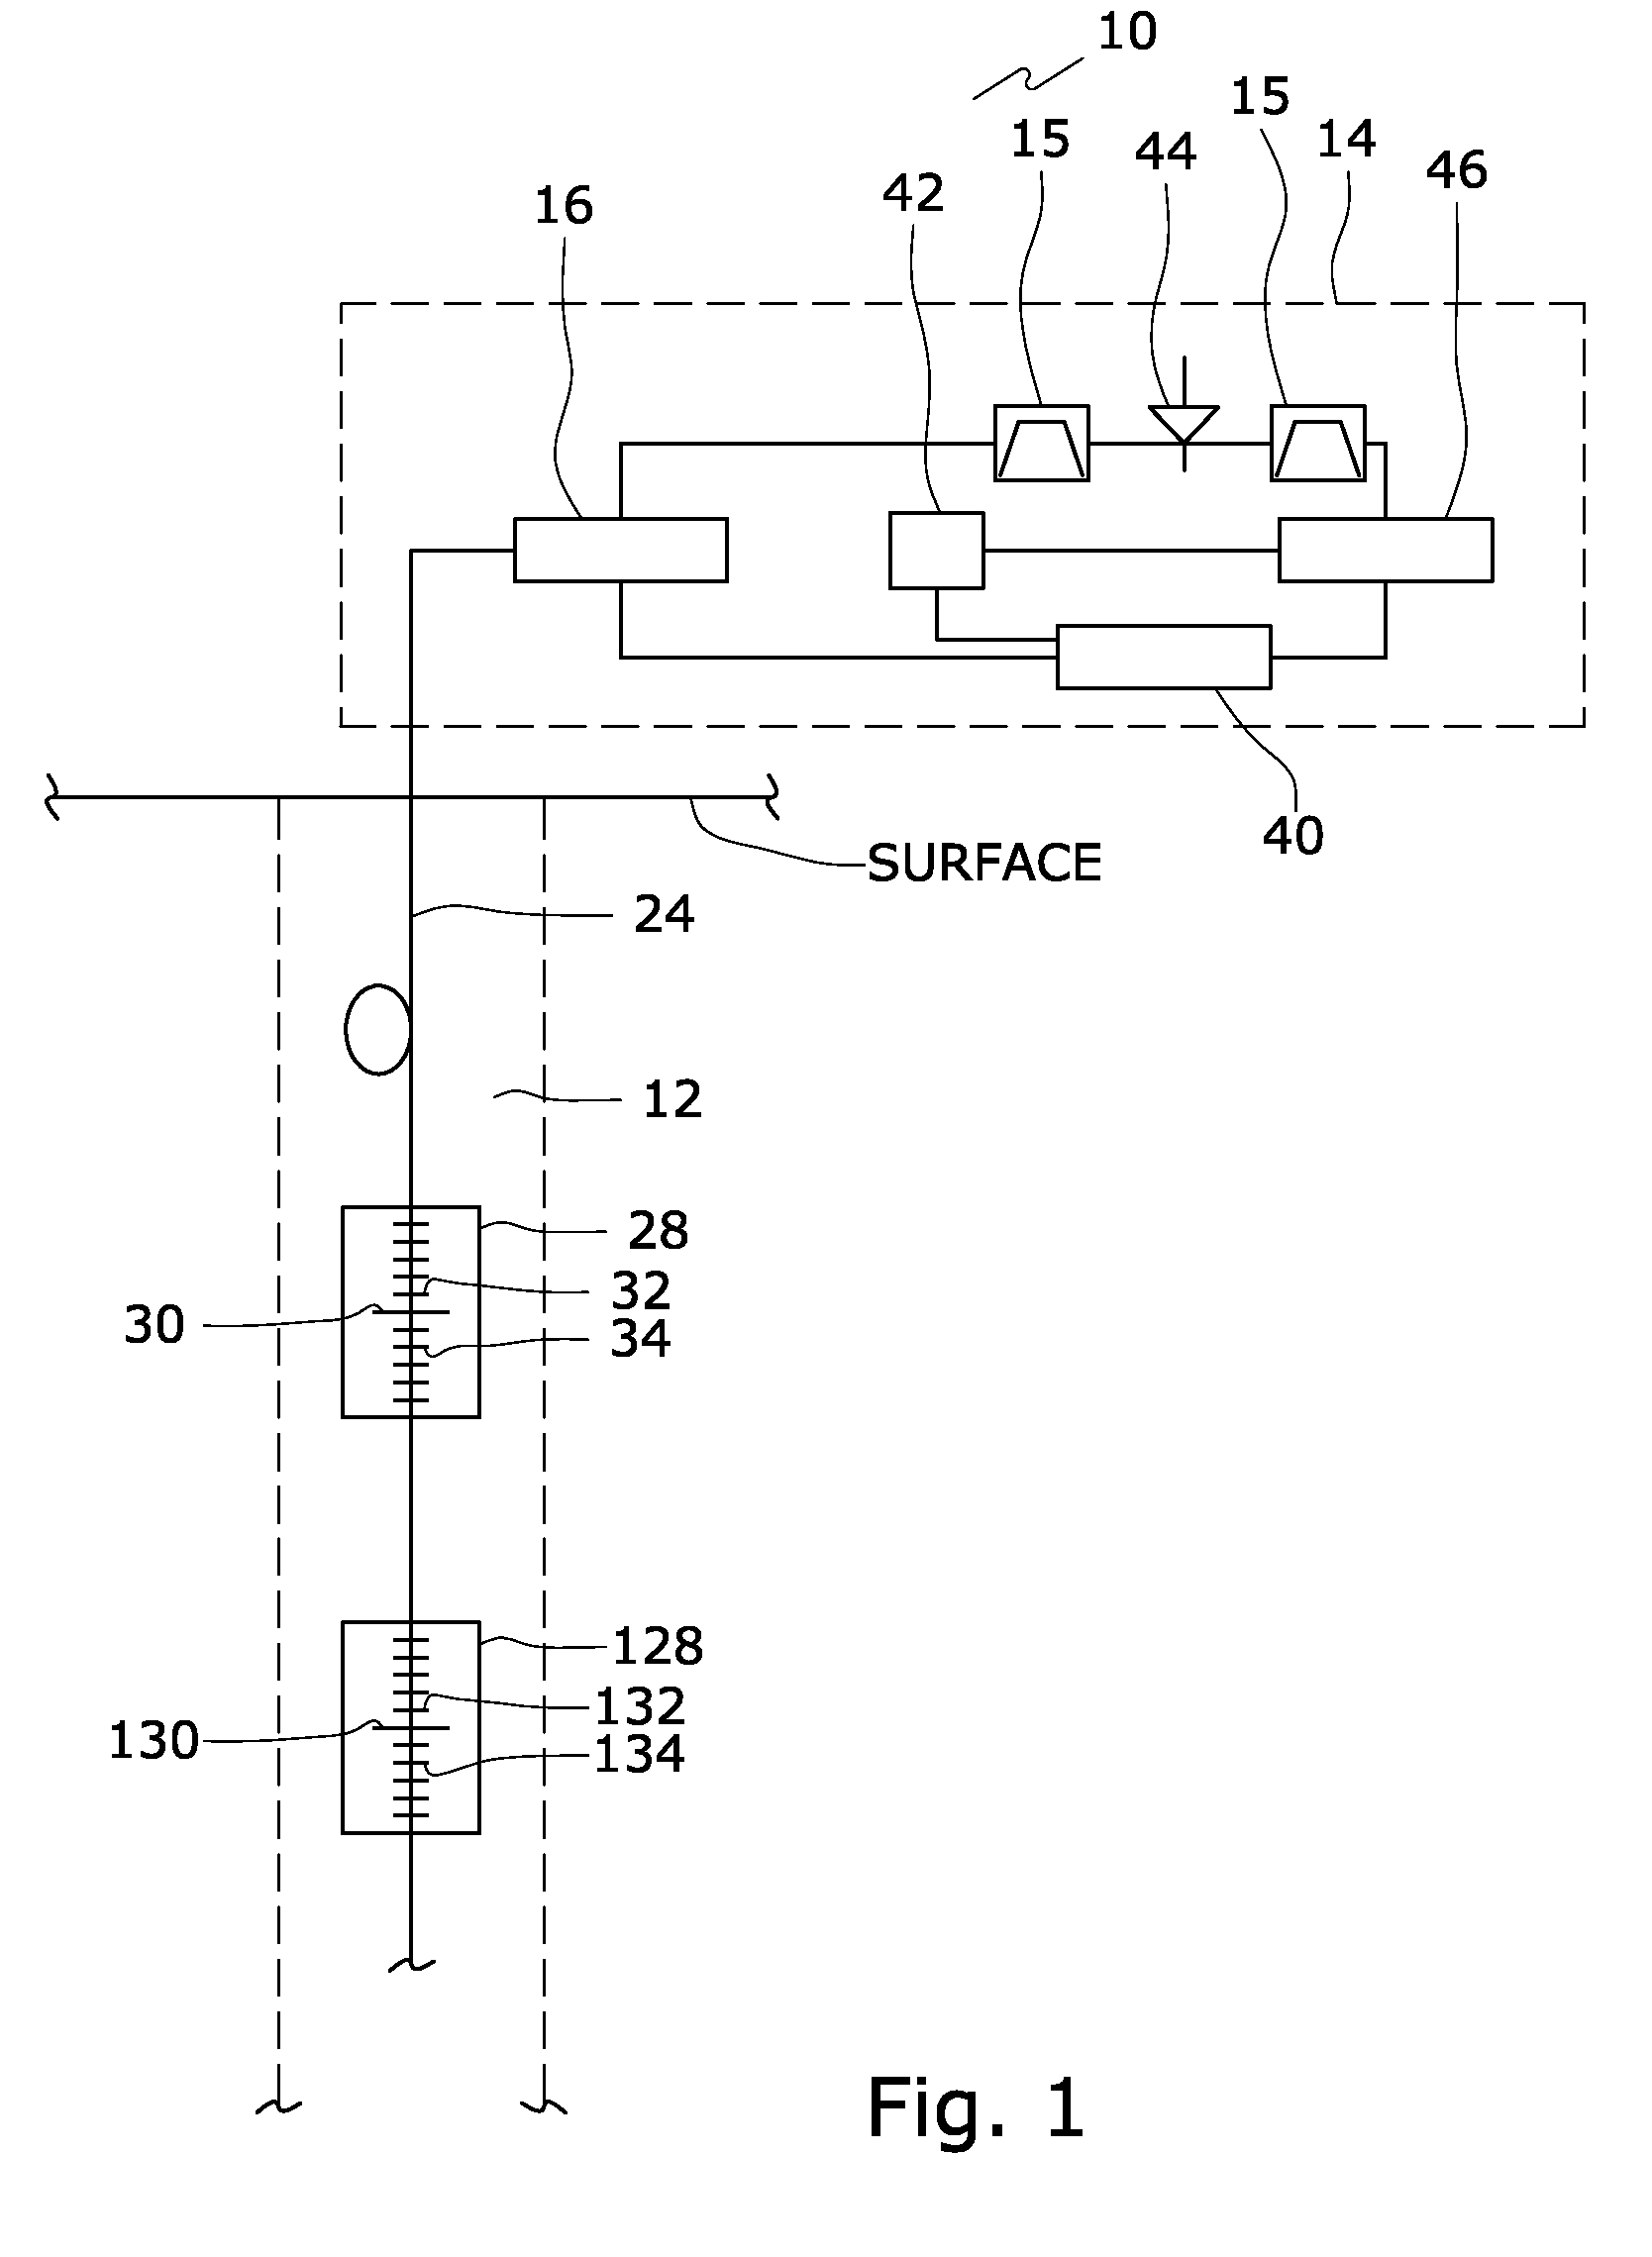 System and method for monitoring a well